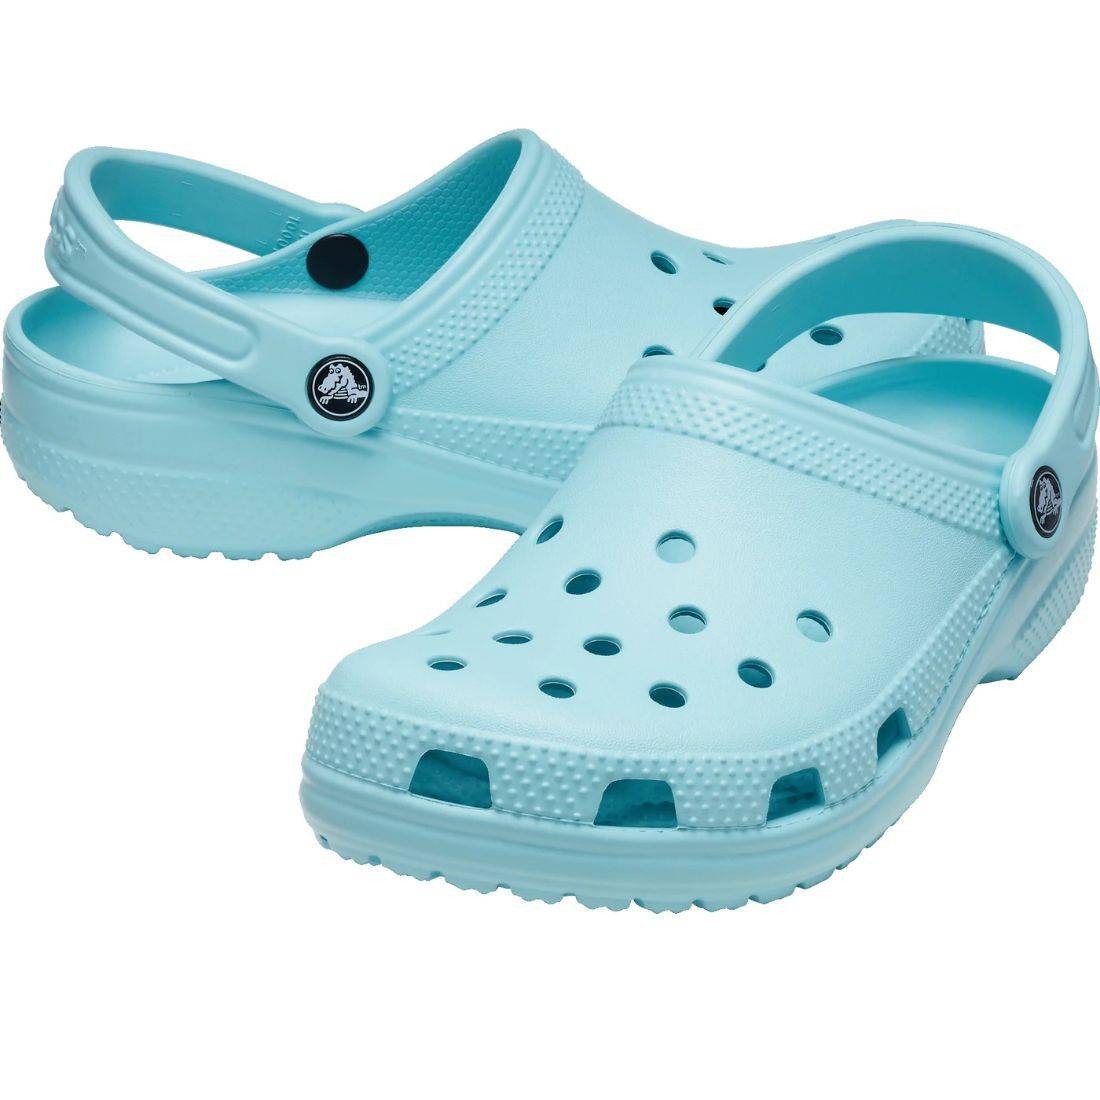 Buy Crocs Classic Pure Water Blue Clog - Crocs, delivered to your home ...